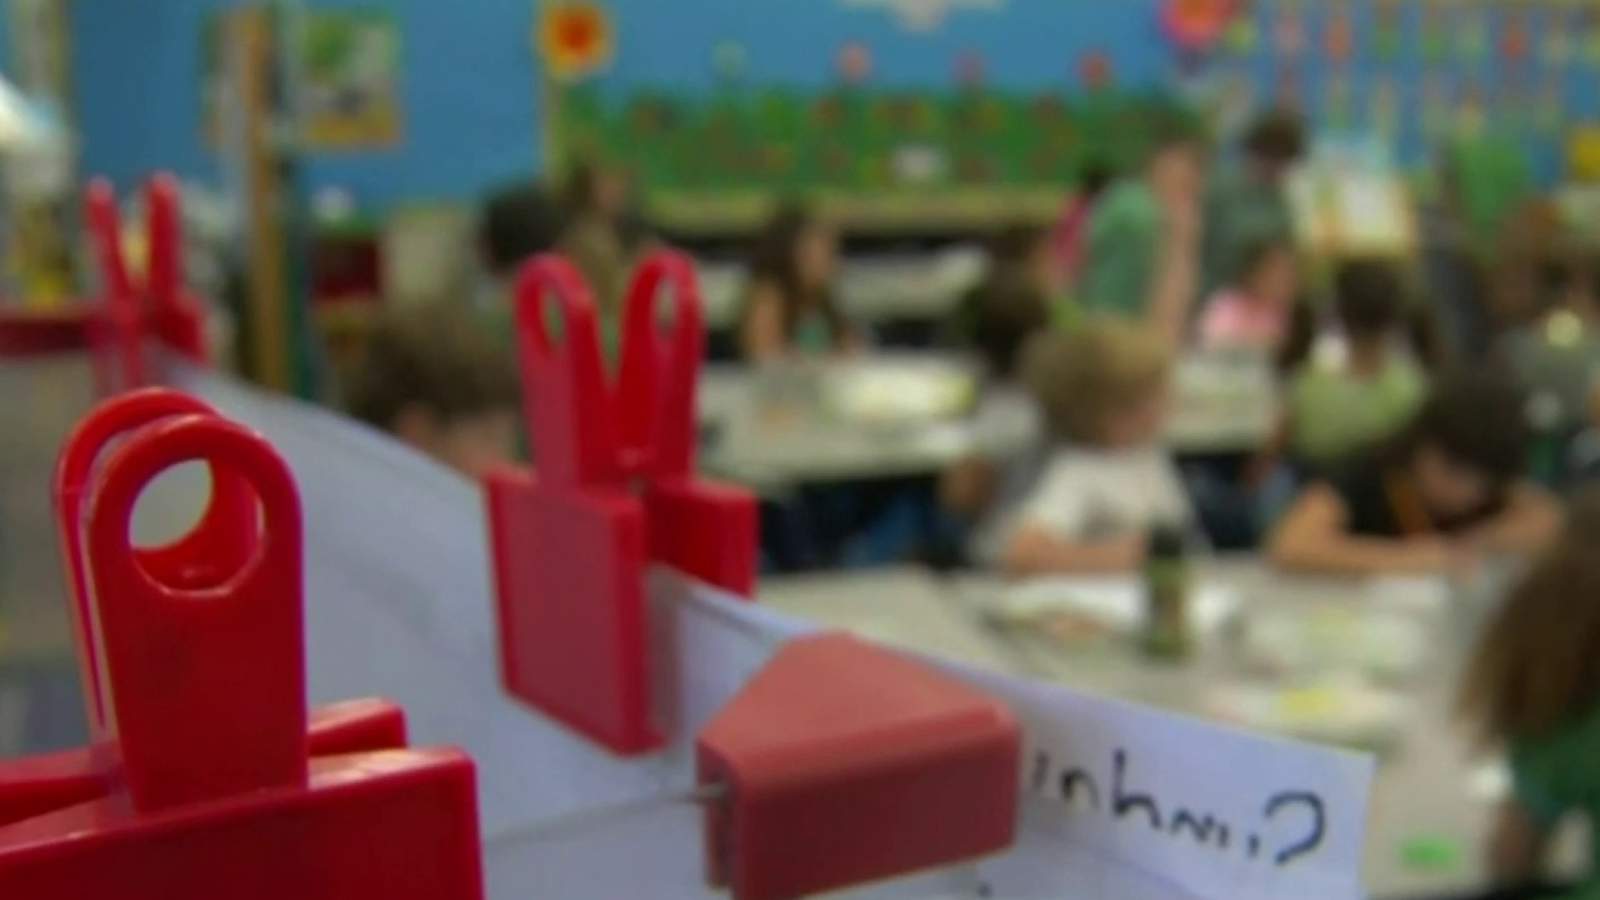 Detroit Federation of Teachers says district is not ensuring their safety